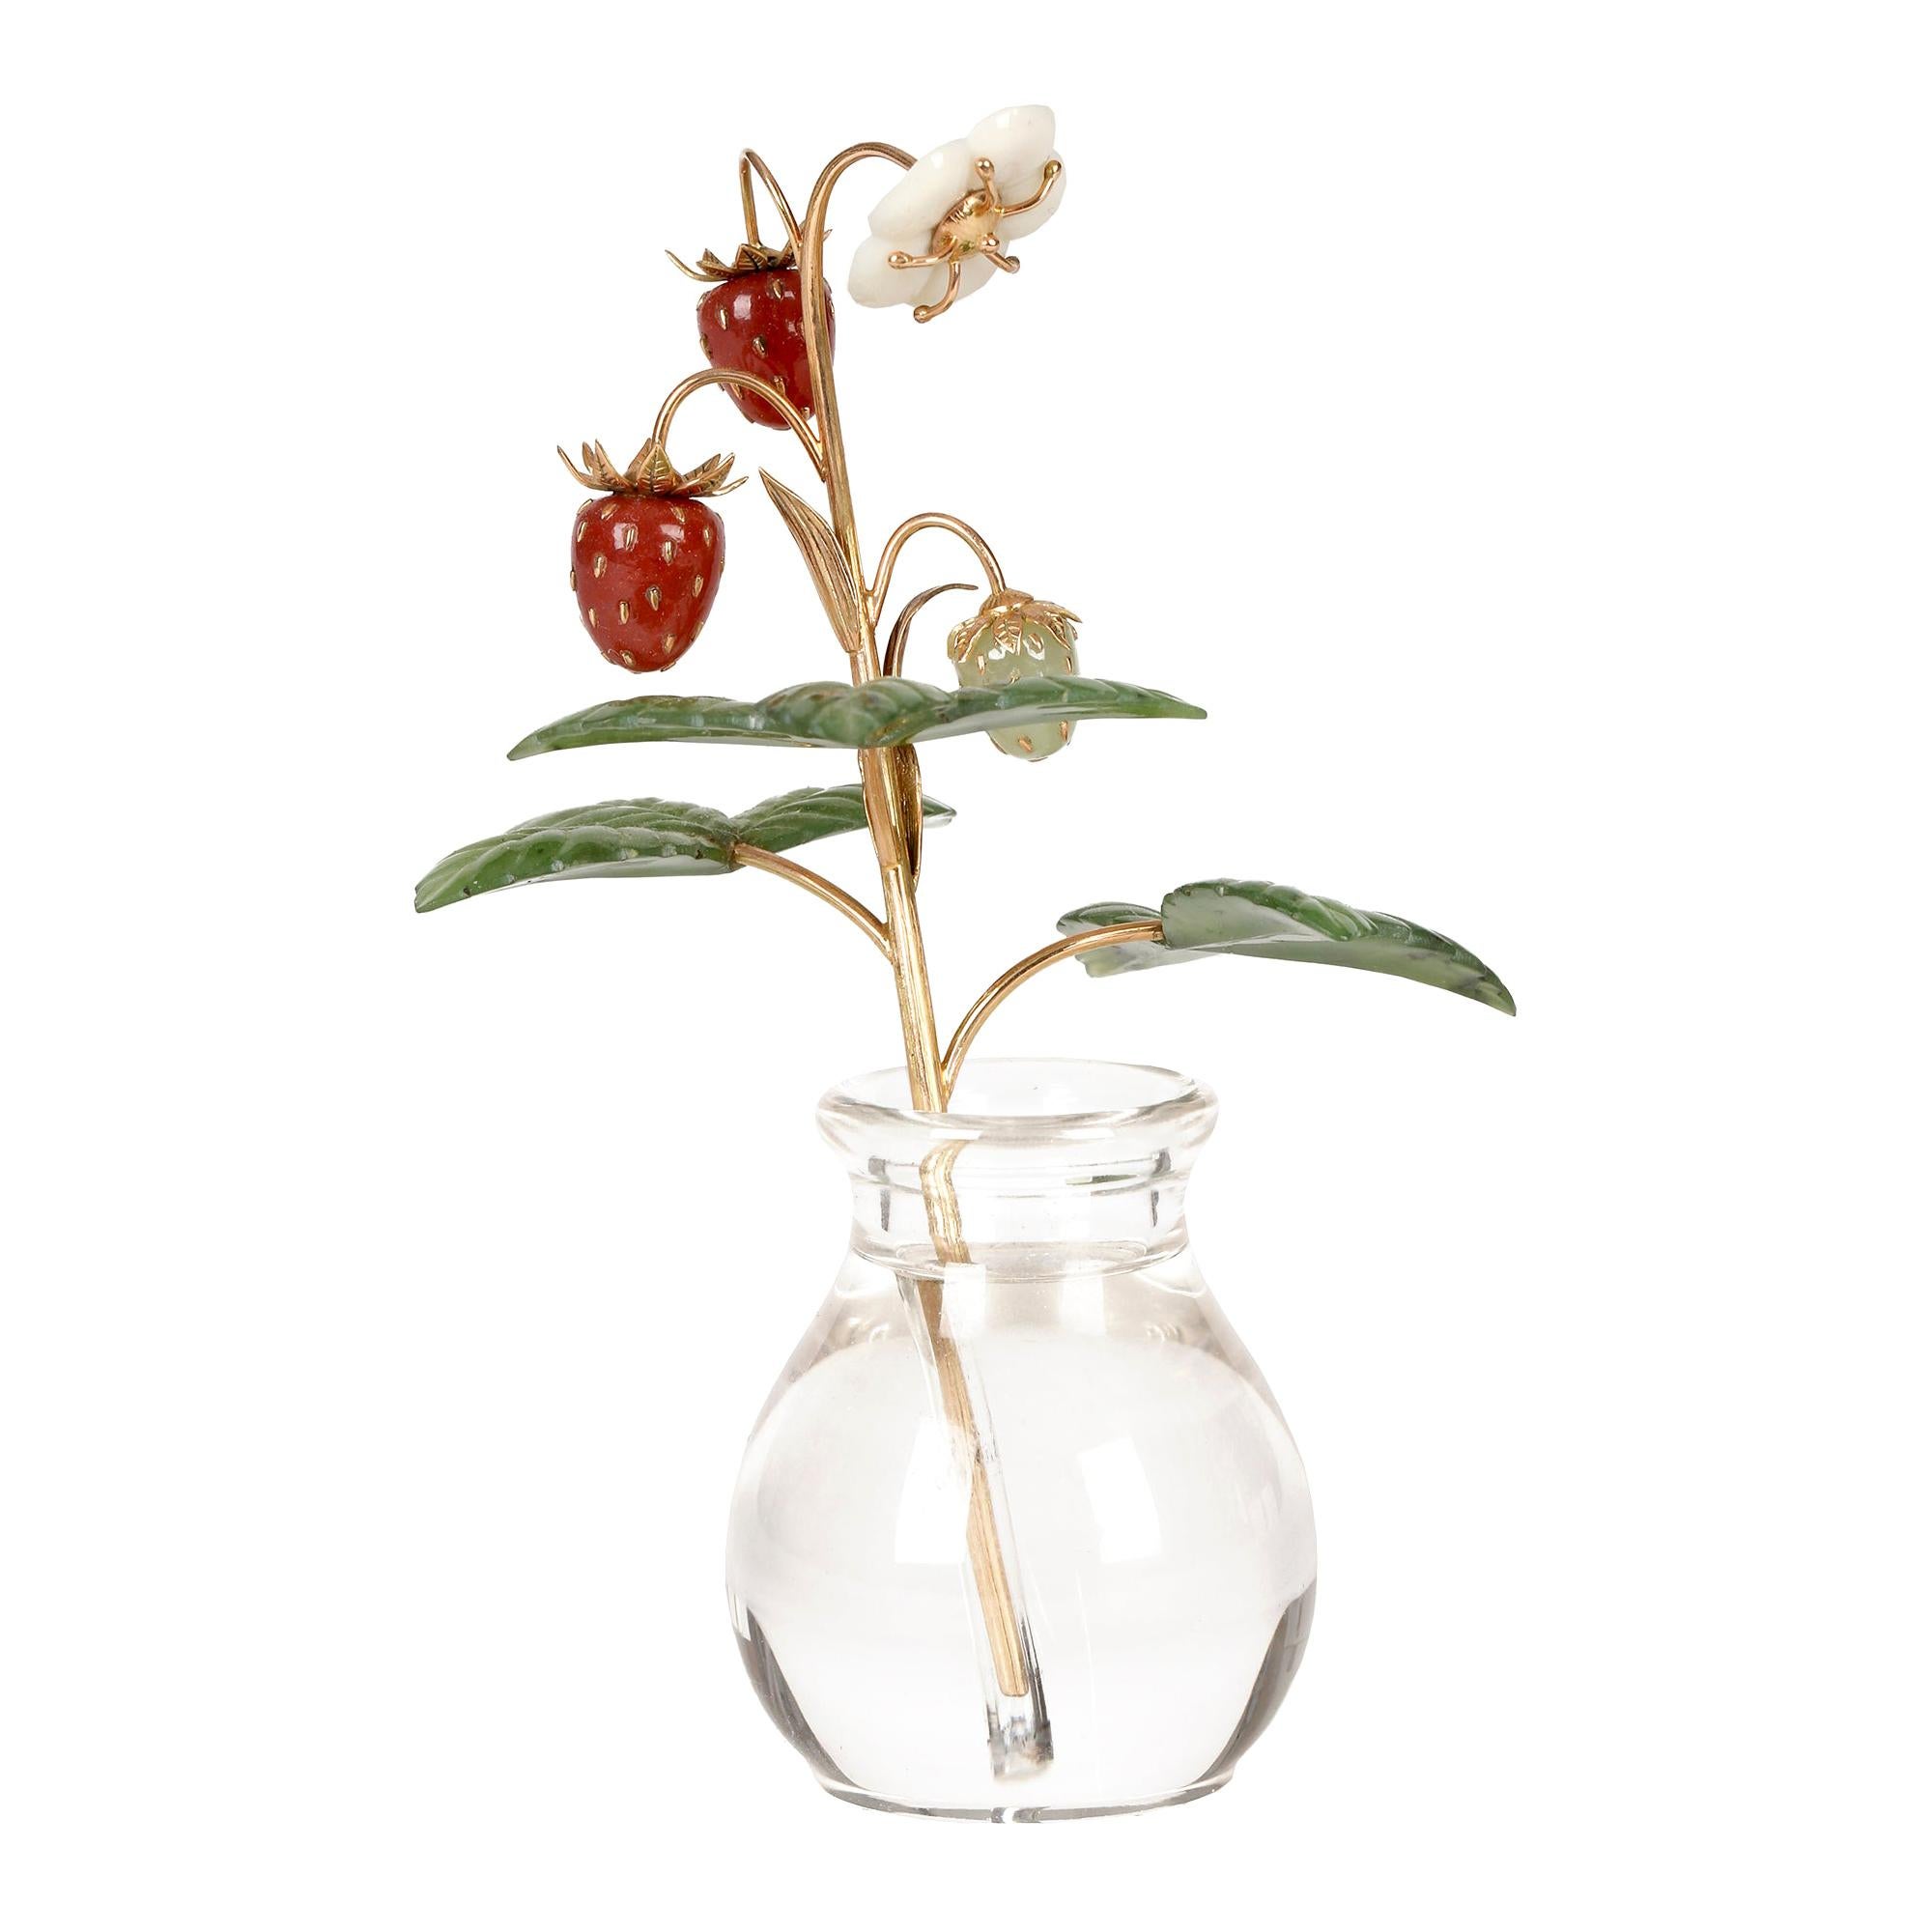 Fabergé Style Exquisite Wild Strawberry Stem with Crystal Vase